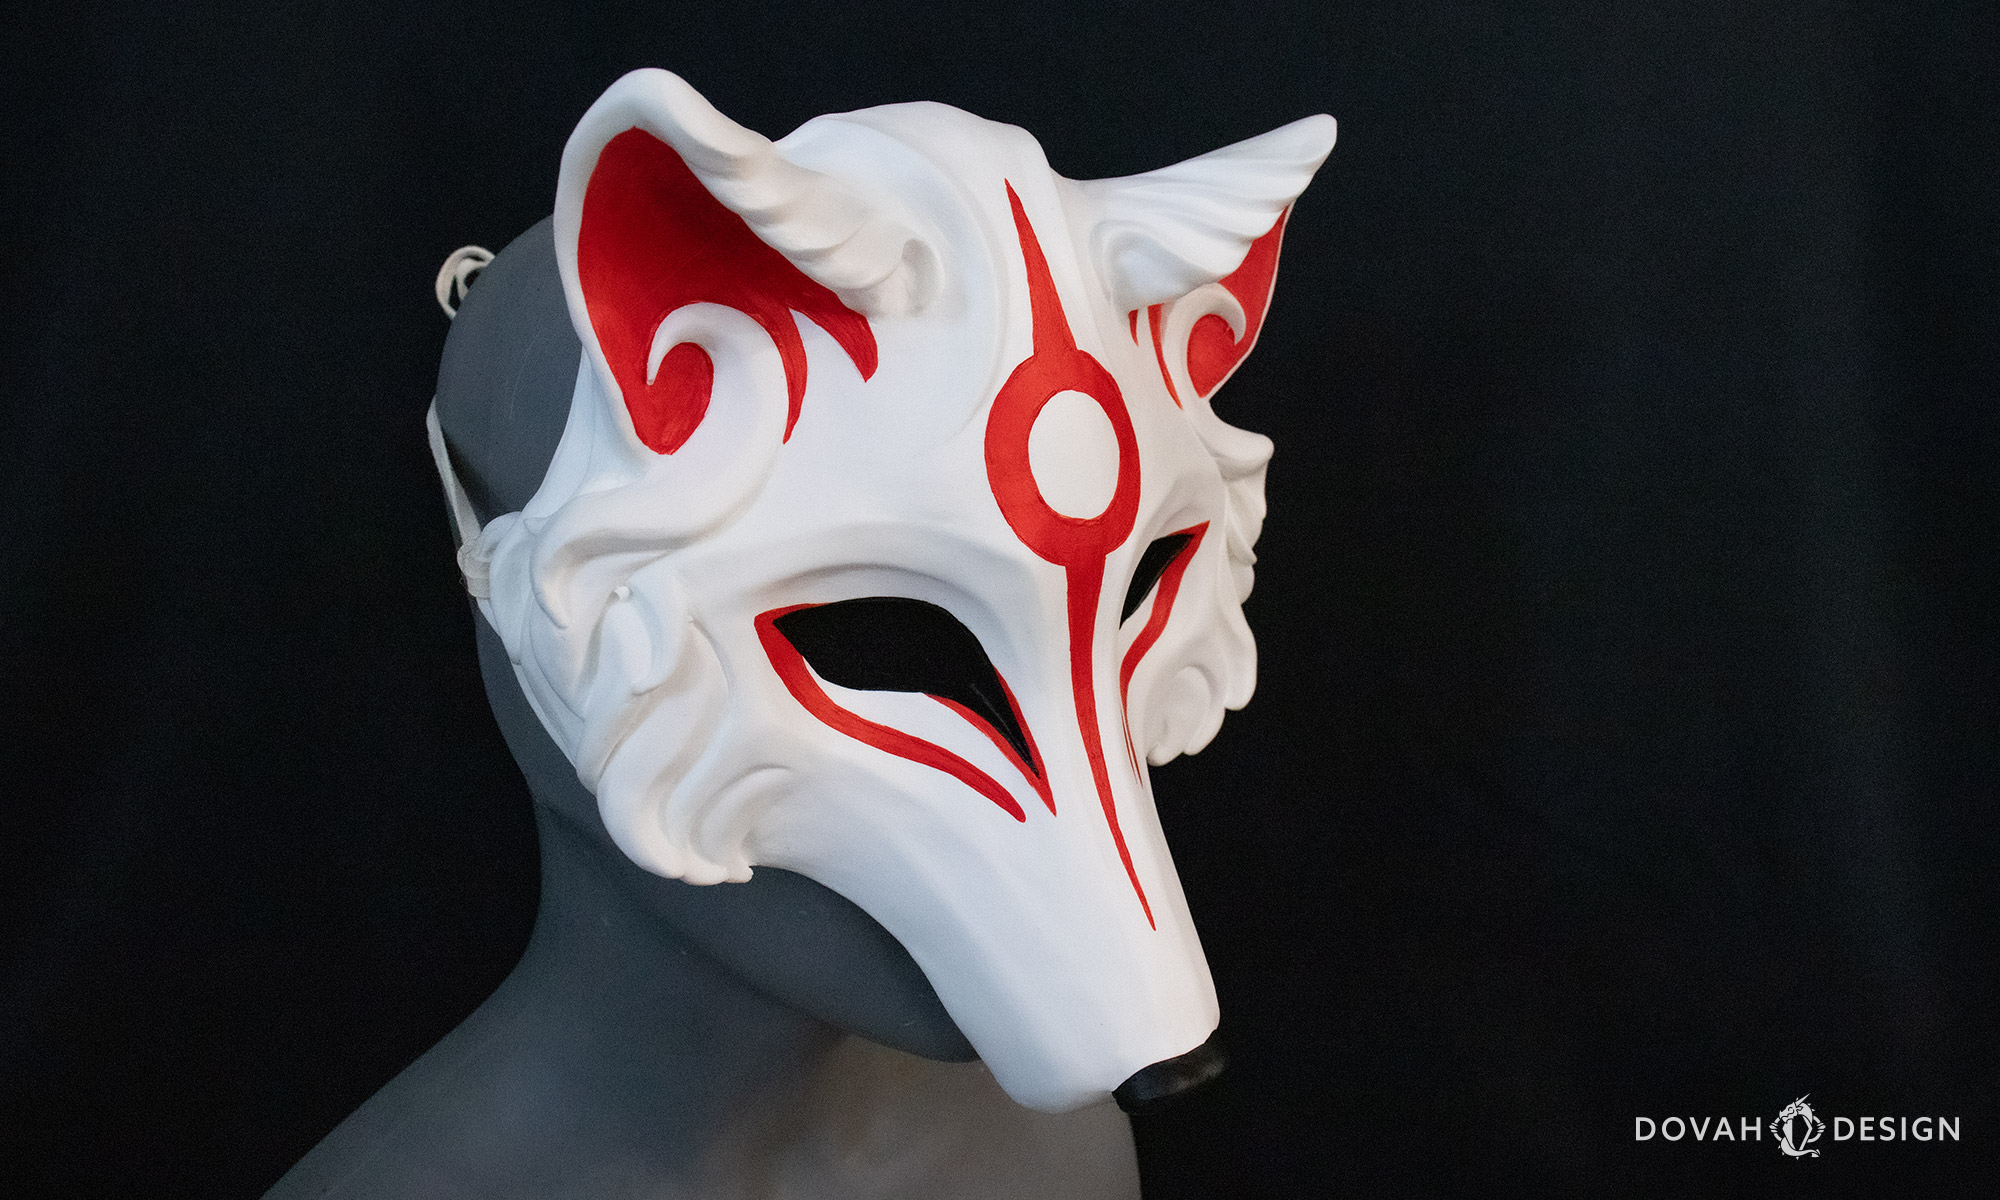 3/4 right view of the handmade Japanese-style Okami mask, cast in white resin with hand painted red details.